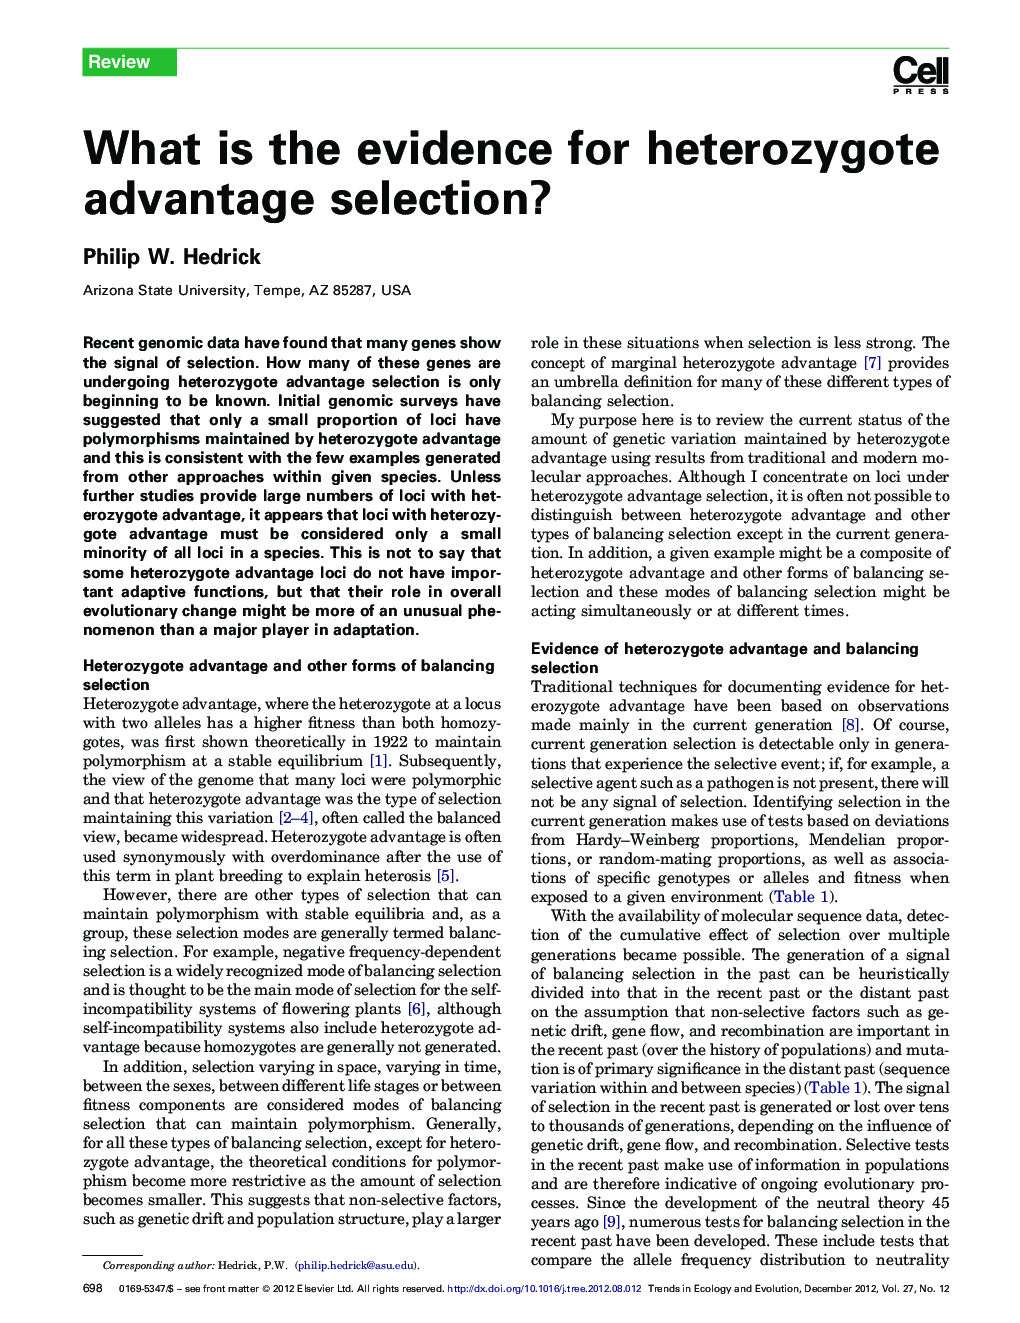 What is the evidence for heterozygote advantage selection?